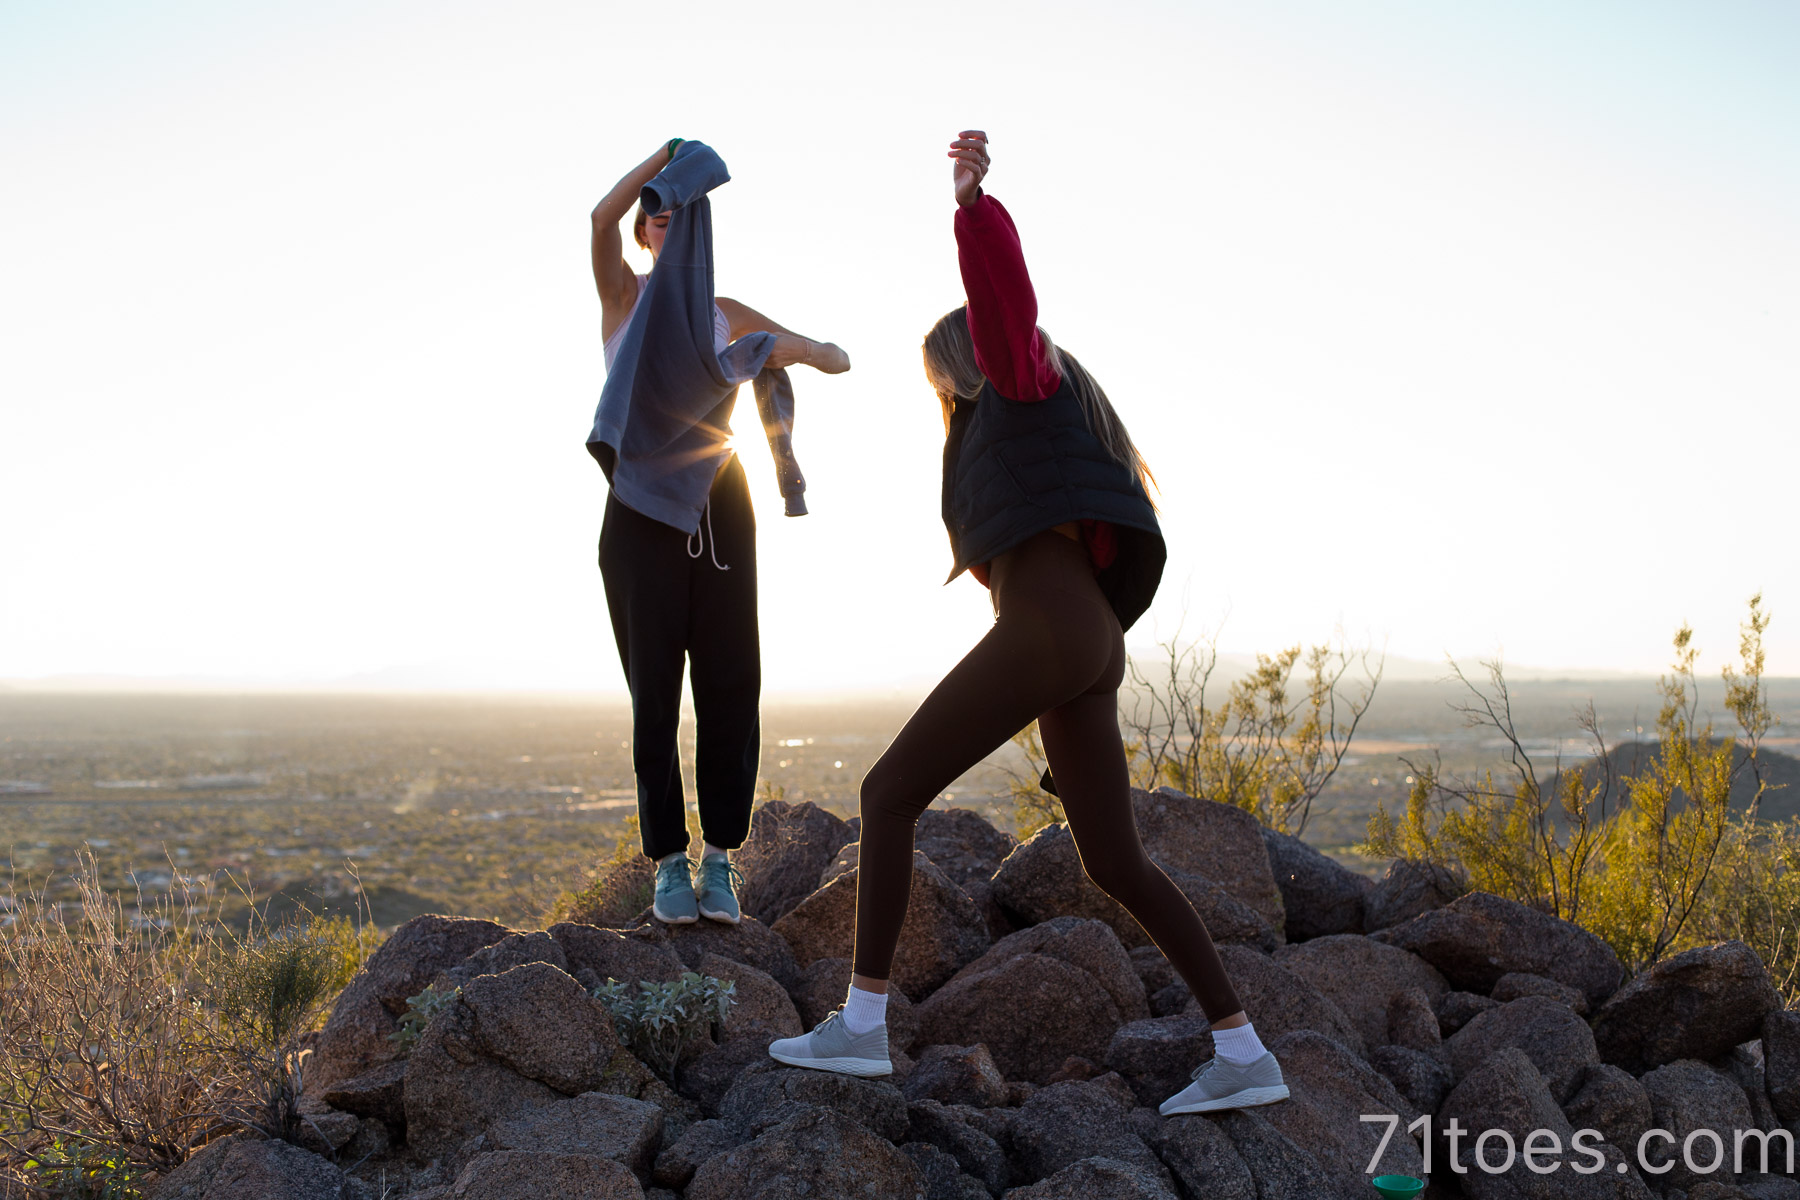 a sunset hike — back to being the boss